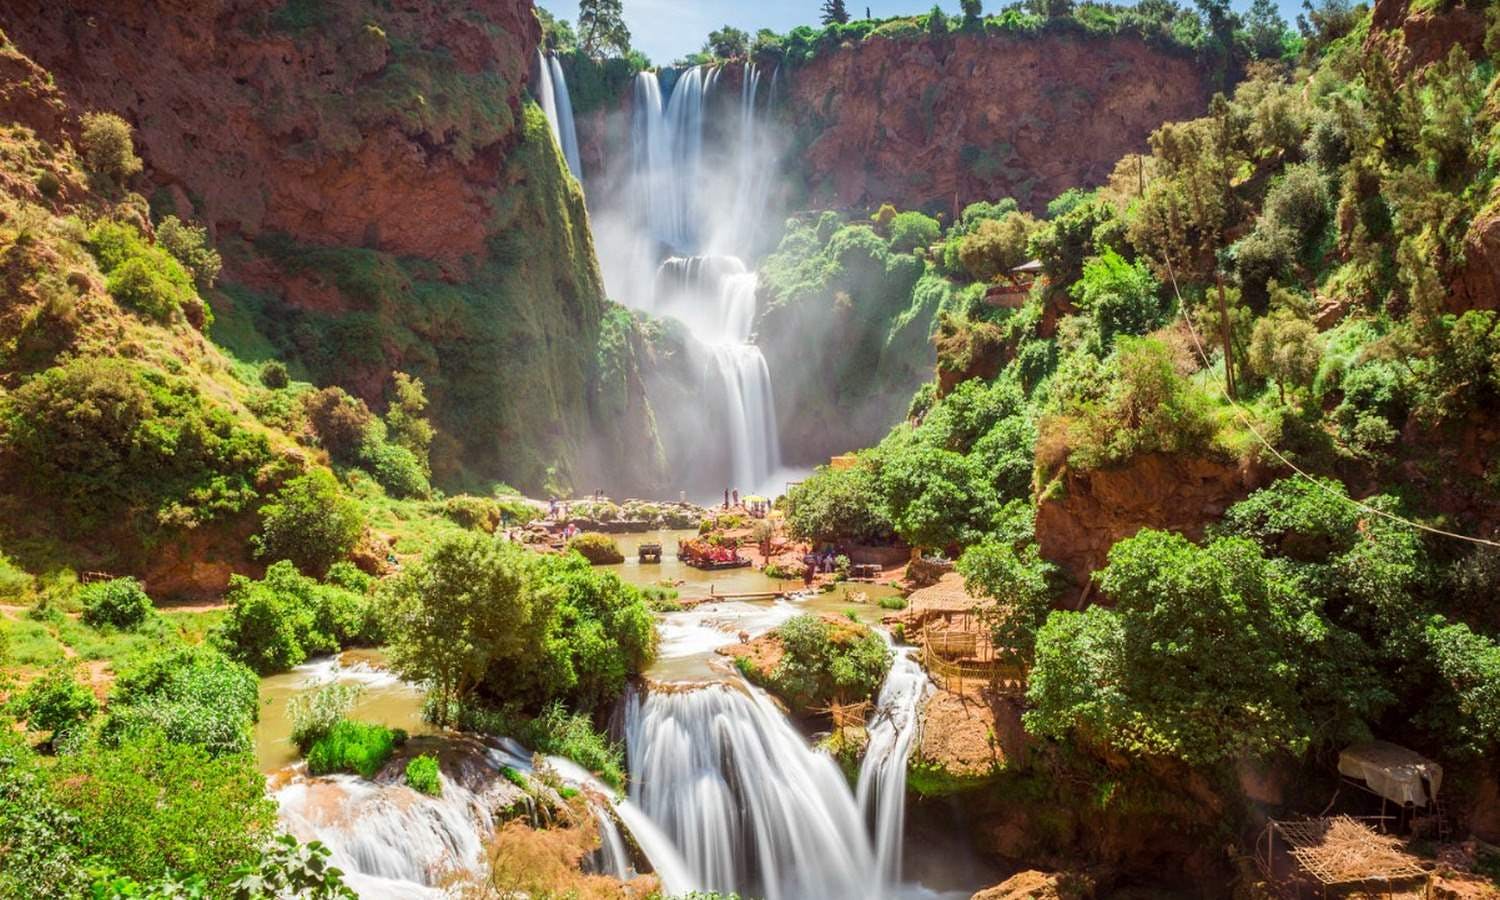 Ouzoud waterfalls day trip & boat ride from Marrakesh